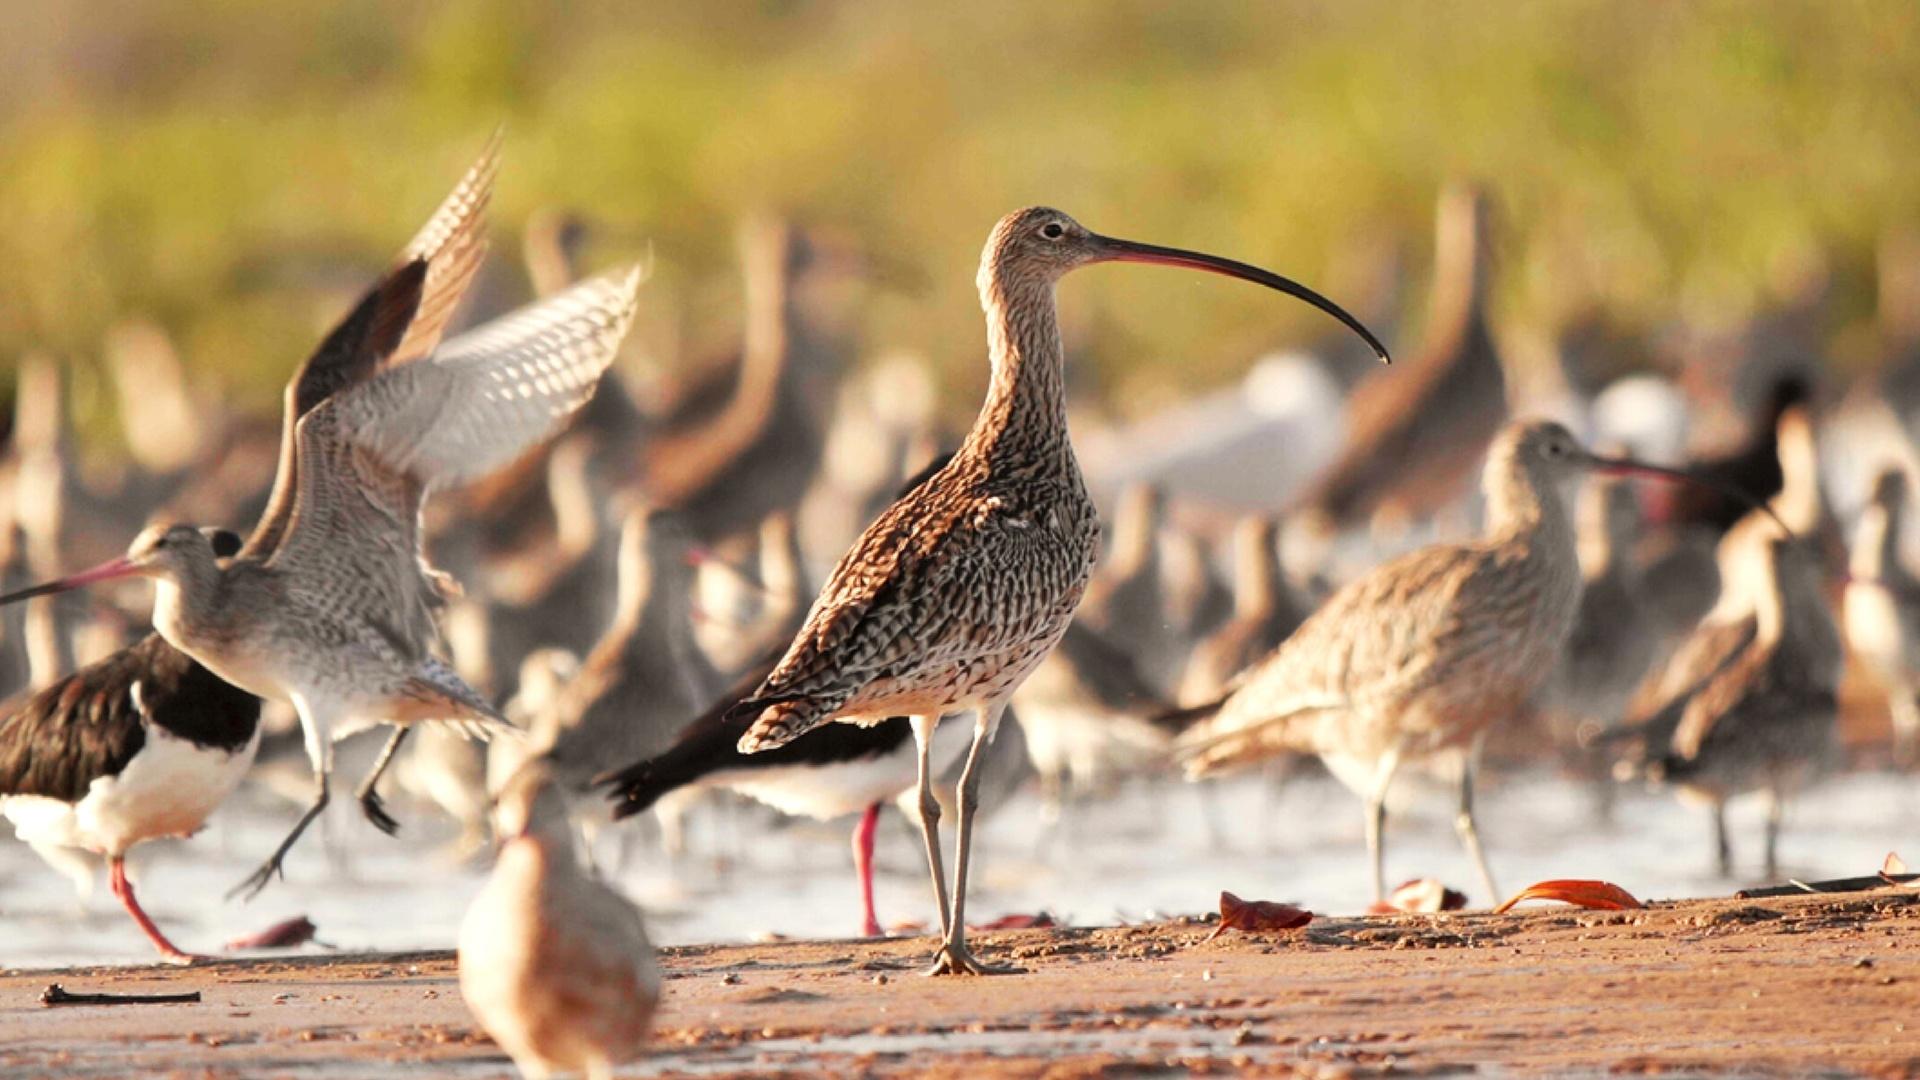 Shorebirds fly thousands of miles each year along ancient and largely unknown migratory routes called Flyways.